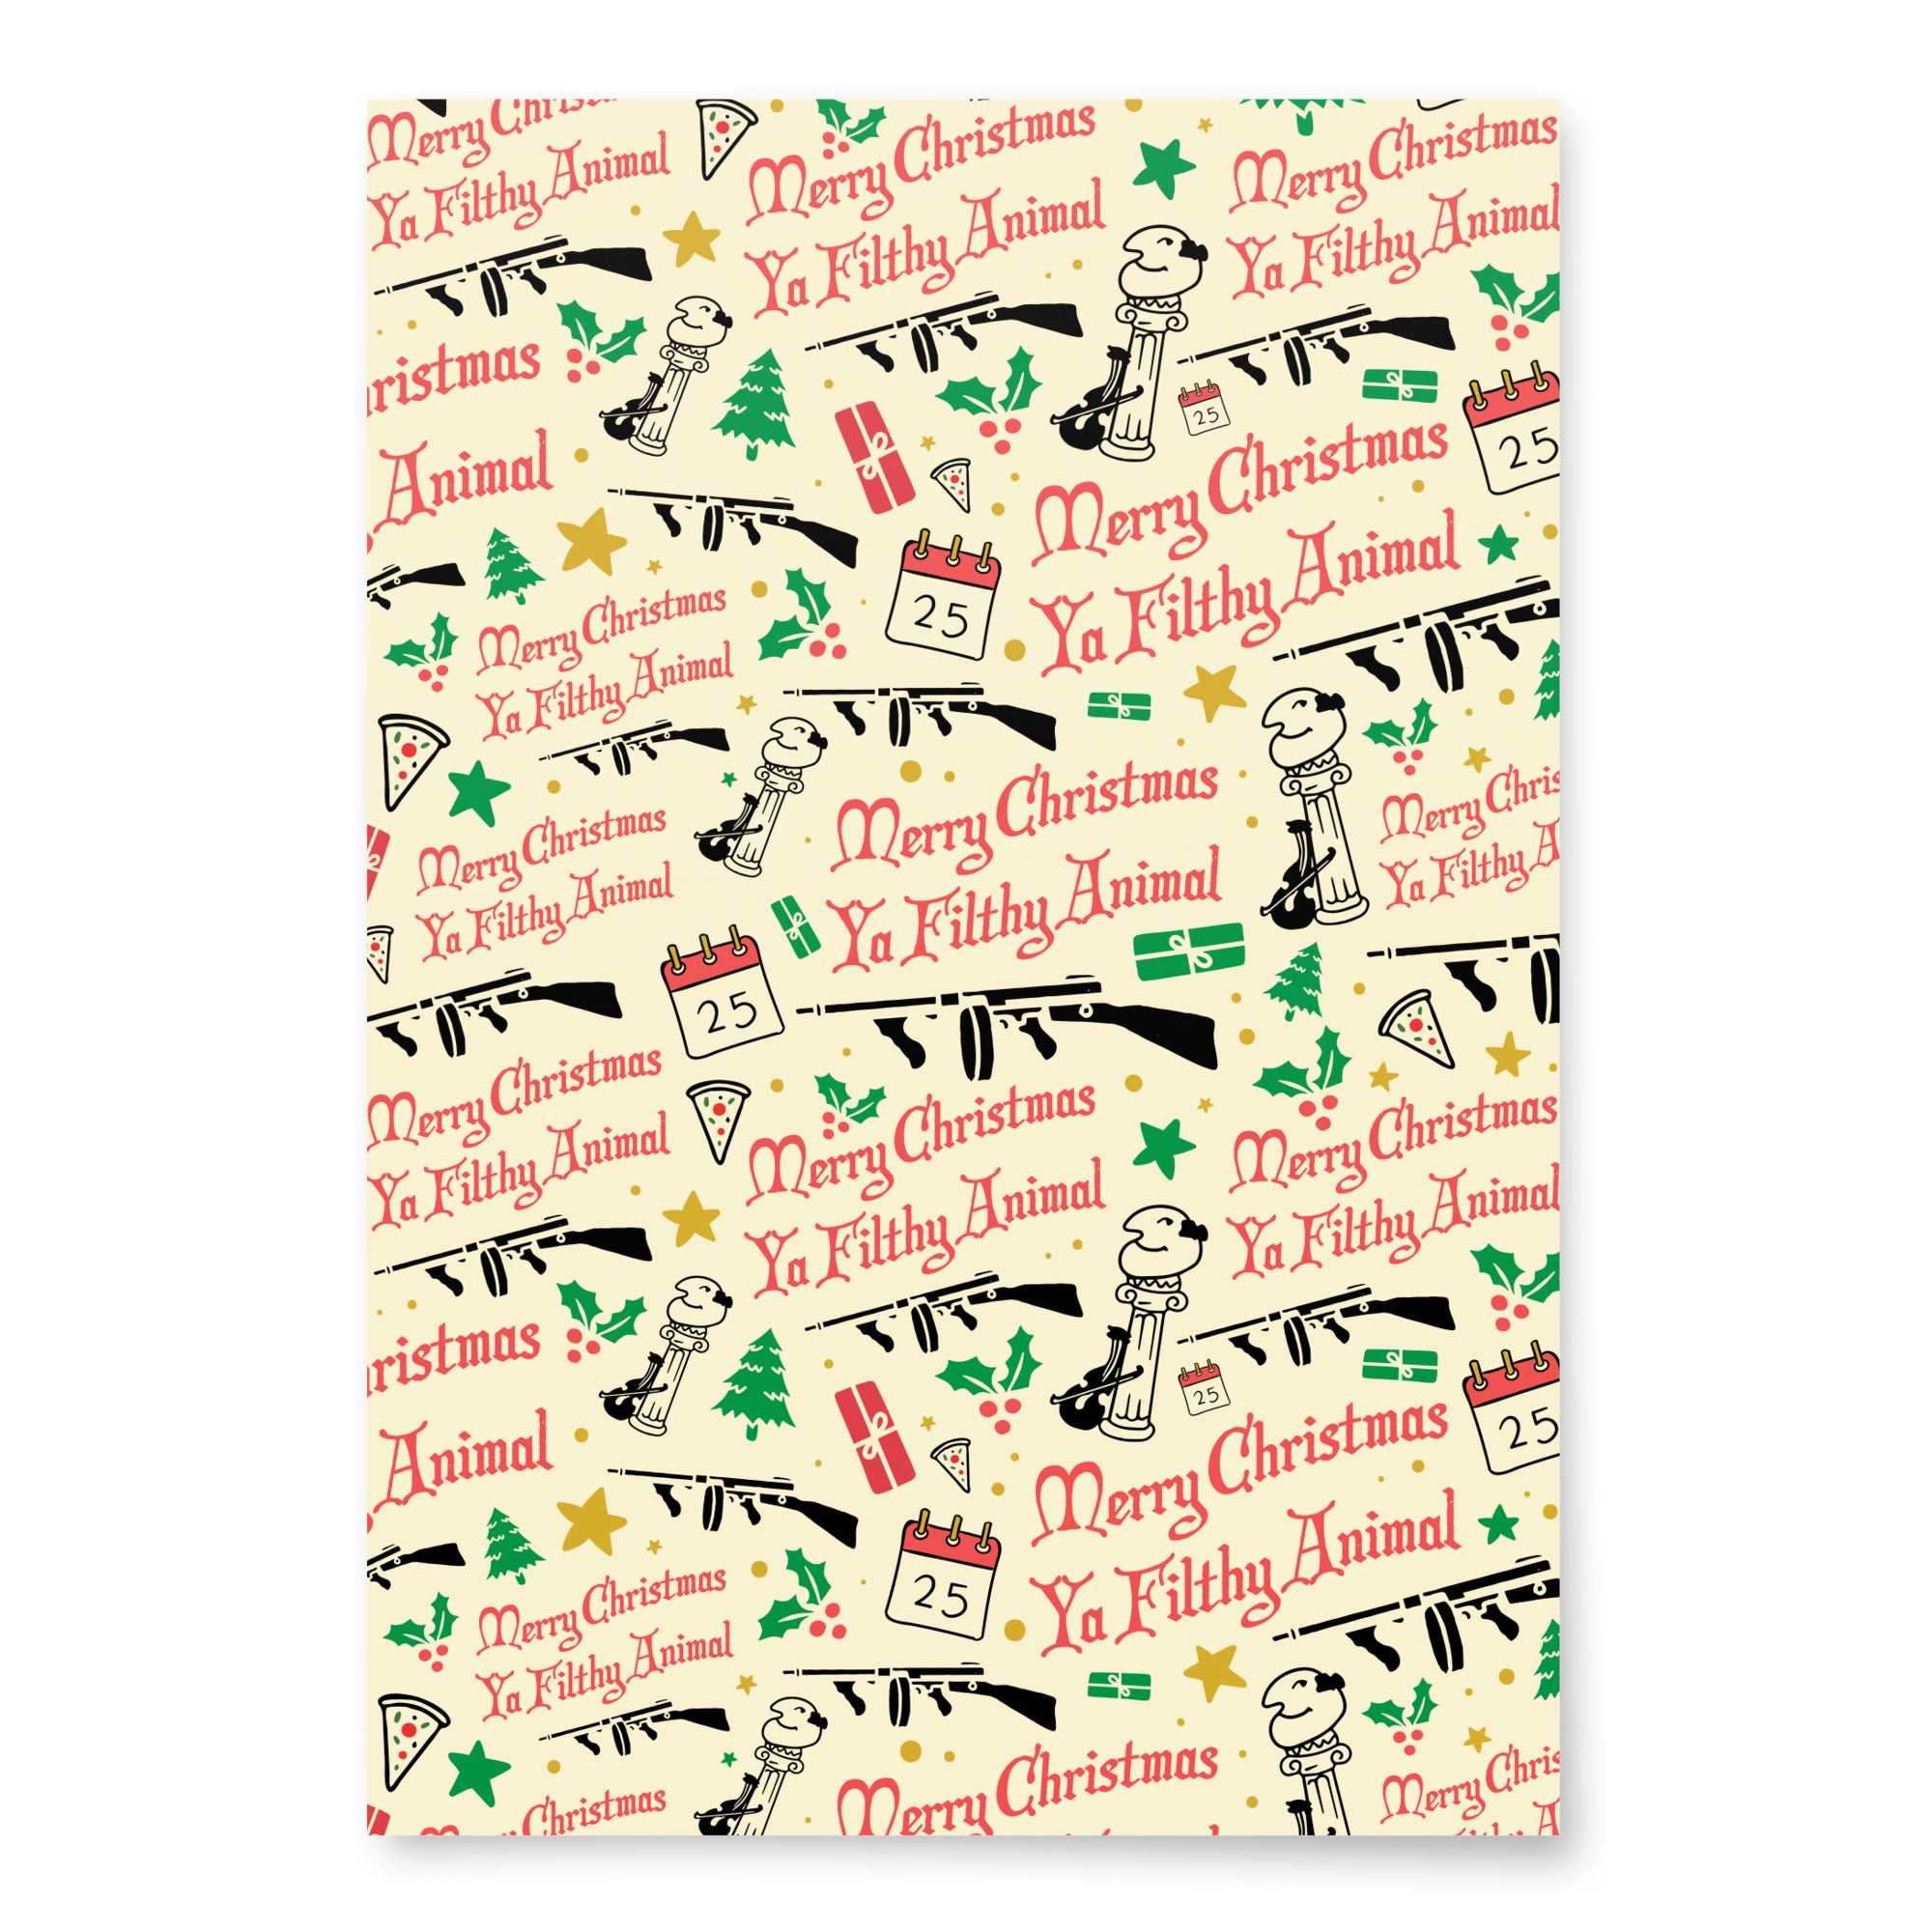 Merry Christmas Ya Filthy Animal - Wrapping Paper Sheets (3)